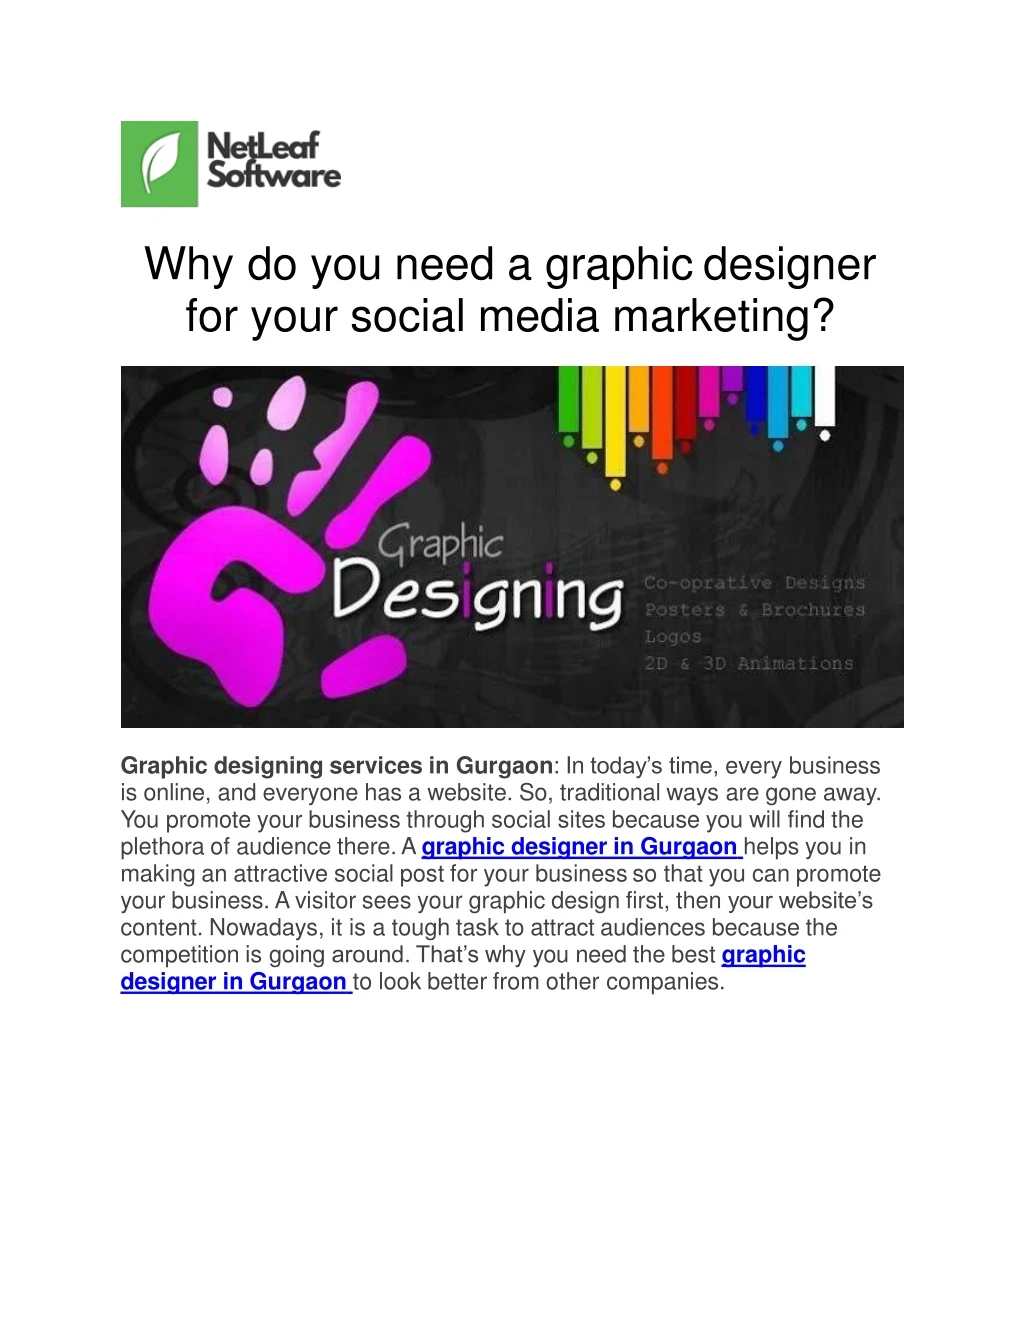 why do you need a graphic designer for your social media marketing